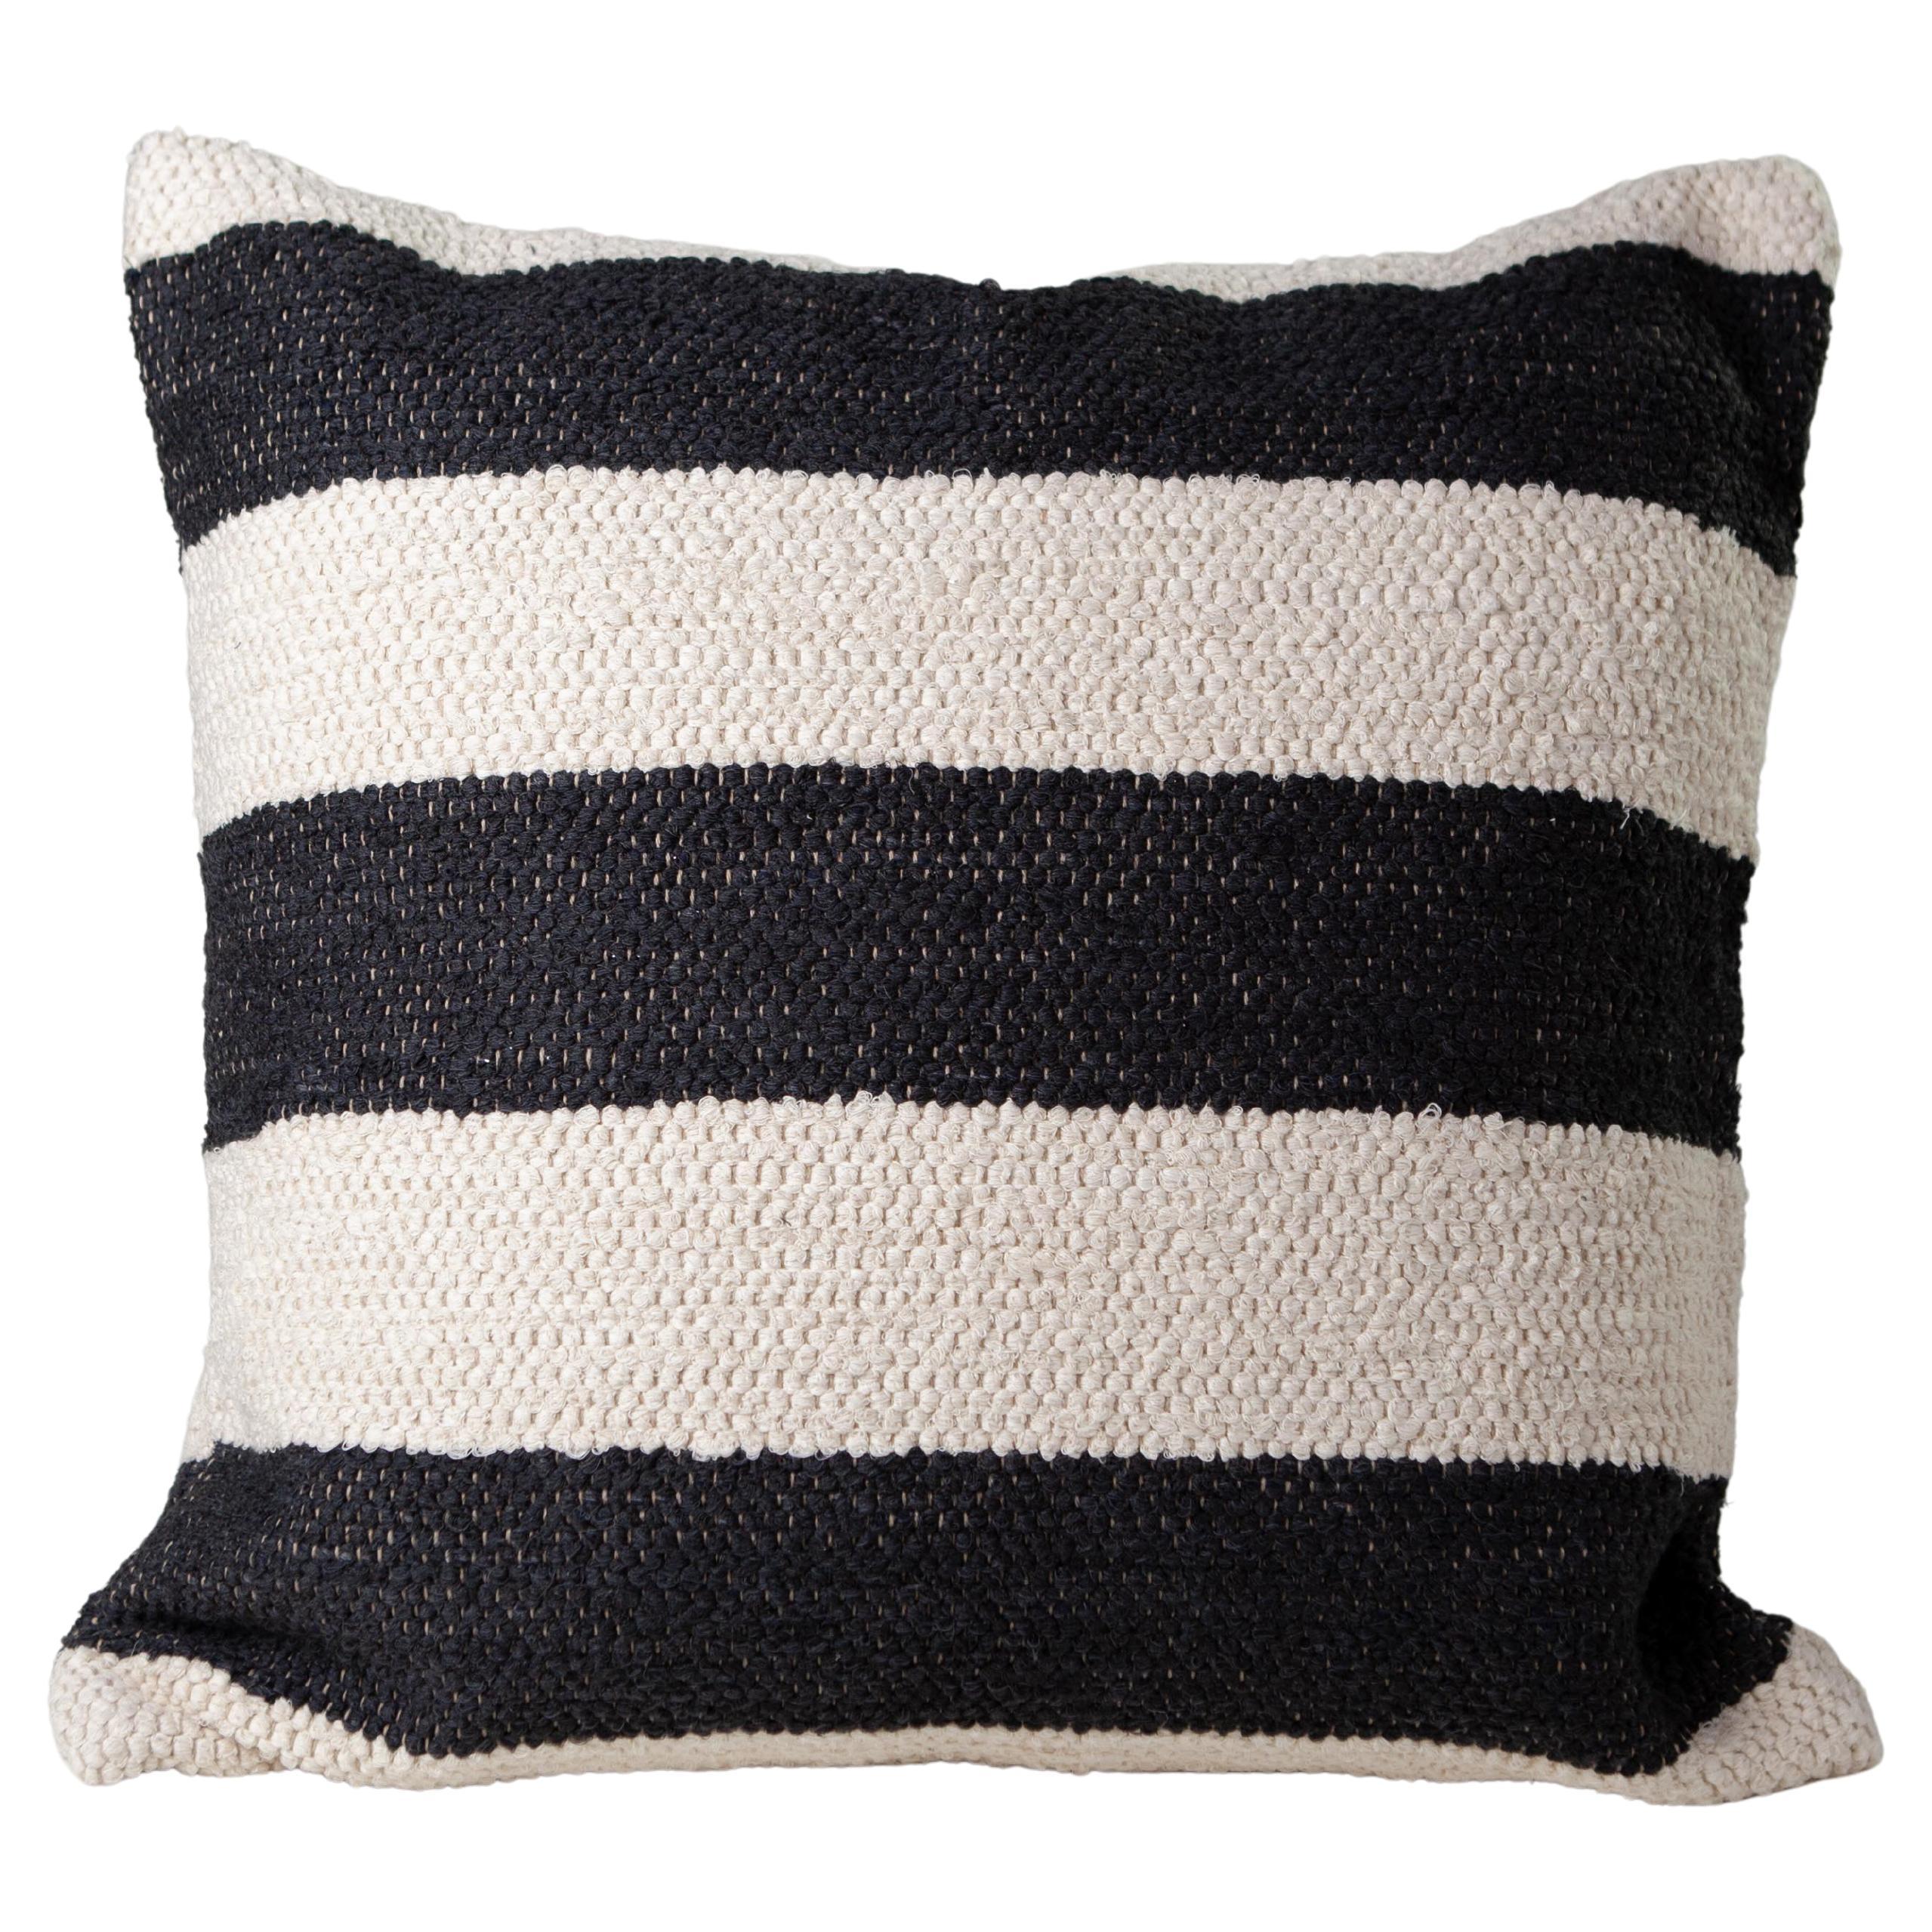 Casa Cubista Textured Recycled Cotton Black and White Bold Stripe Throw Pillow For Sale